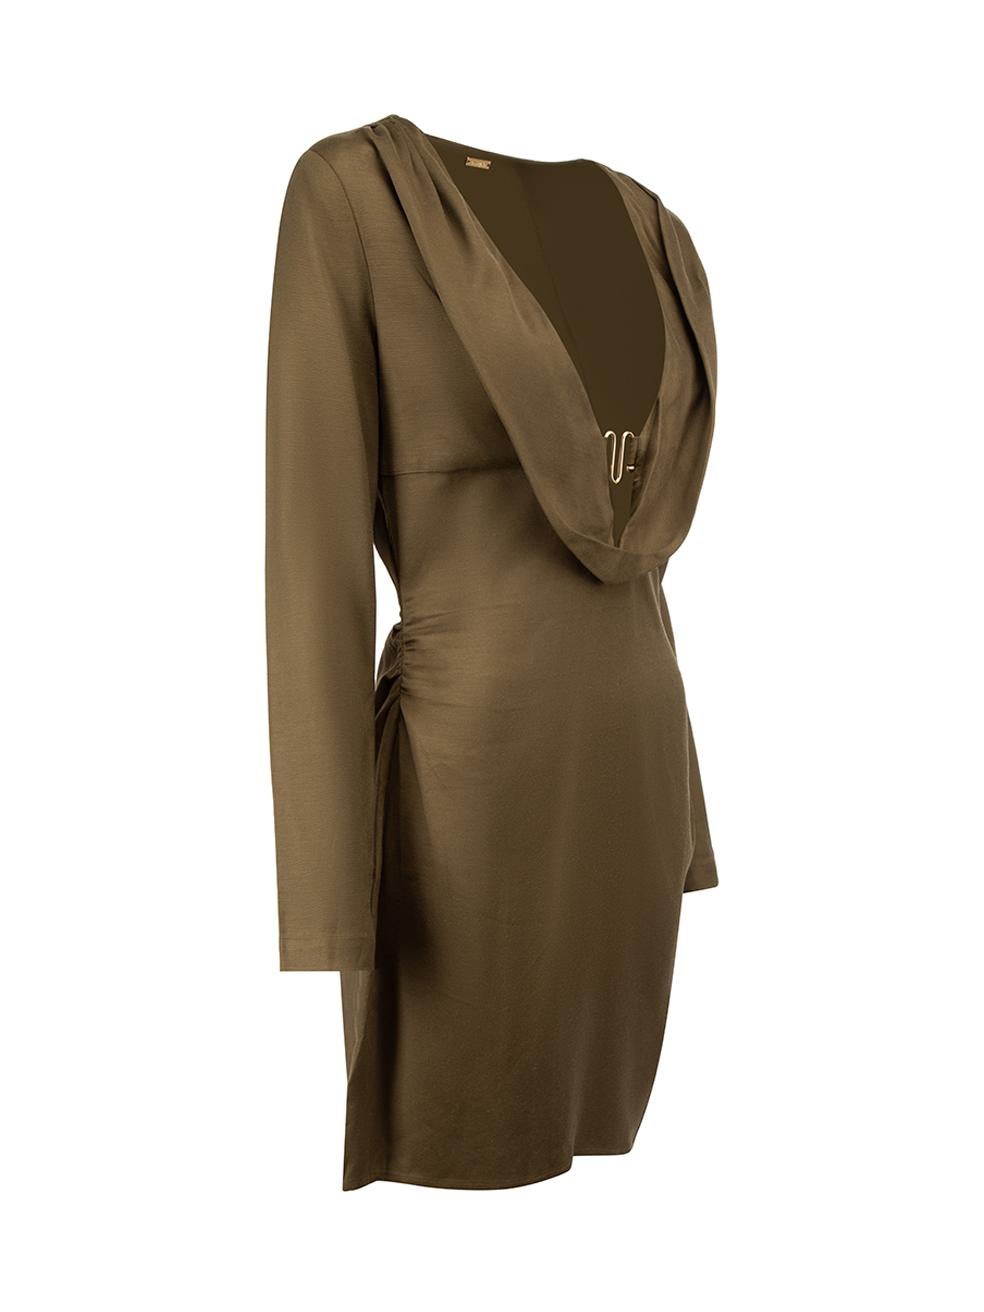 CONDITION is Very good. Hardly any visible wear to dress is evident on this used Cult Gaia designer resale item.



Details


Khaki

Synthetic

Mini bodycon dress

Deep plunge cowl neckline

Ring detail on centre

Side zip closure





Made in